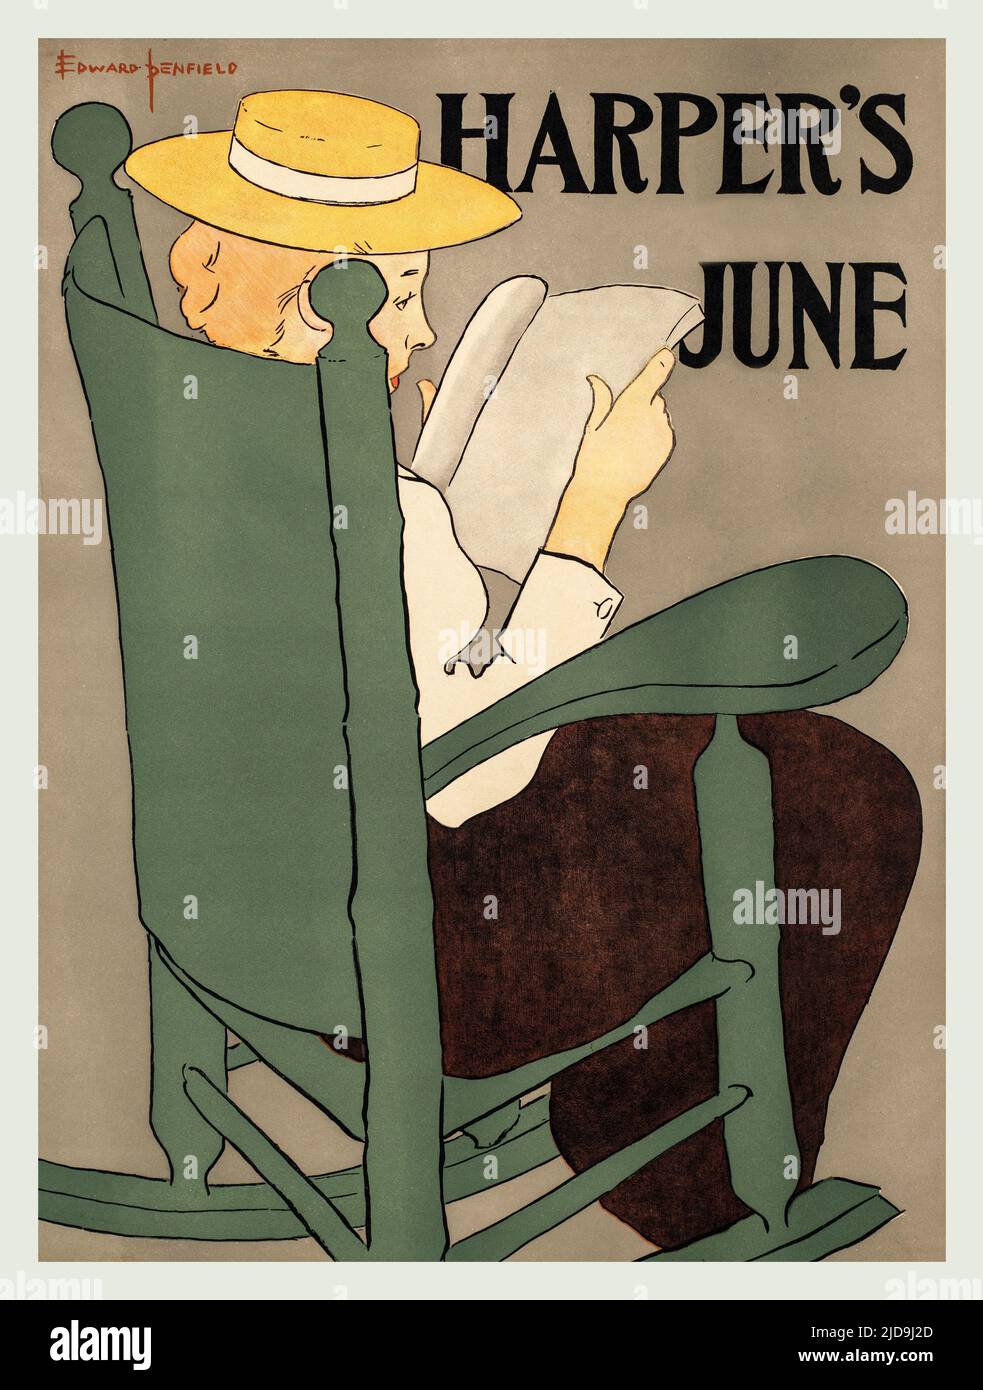 A turn of the 20th century illustration by Edward Penfield (1866-1925) considered by many to be the father of the American poster. Featuring a woman reading while sitting on a rocking chair. Harper’s Magazine, the oldest general-interest monthly in America. Stock Photo